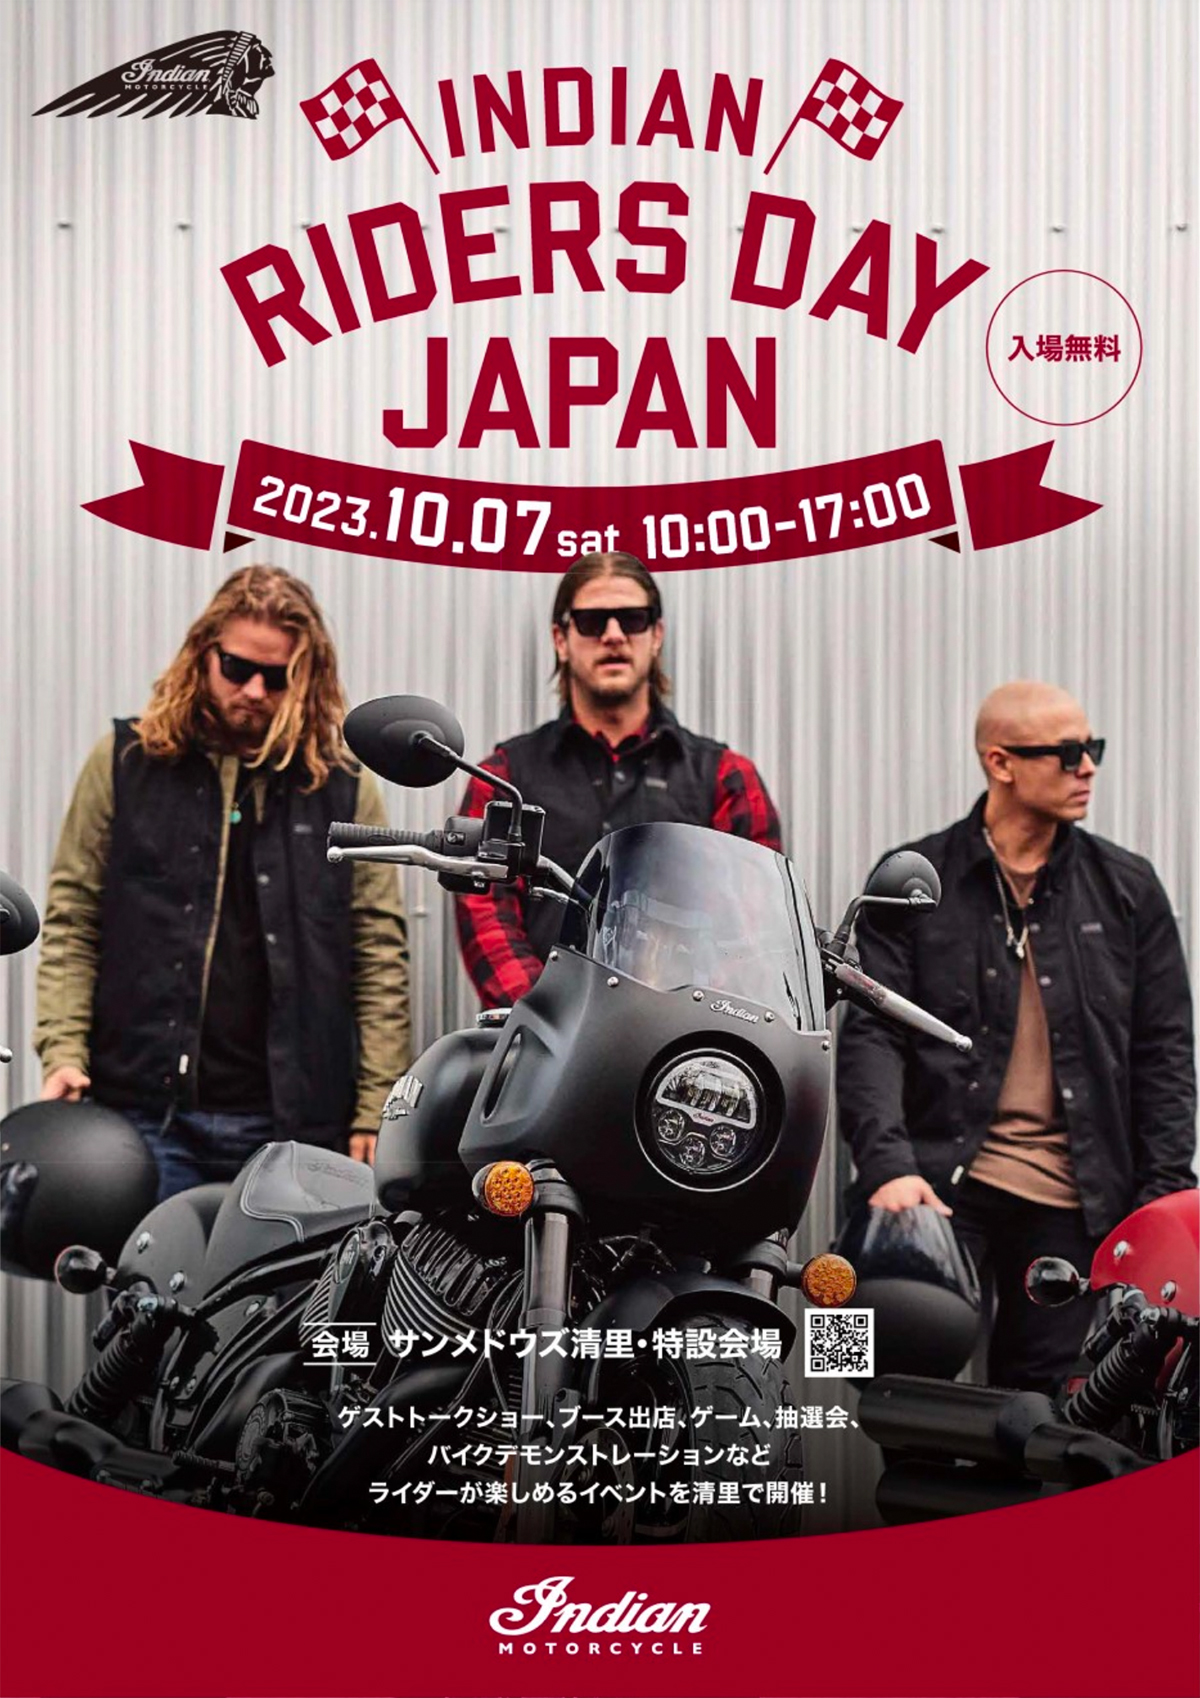 INDIAN RIDERS DAY JAPAN のコンテンツが続々発表   バイク